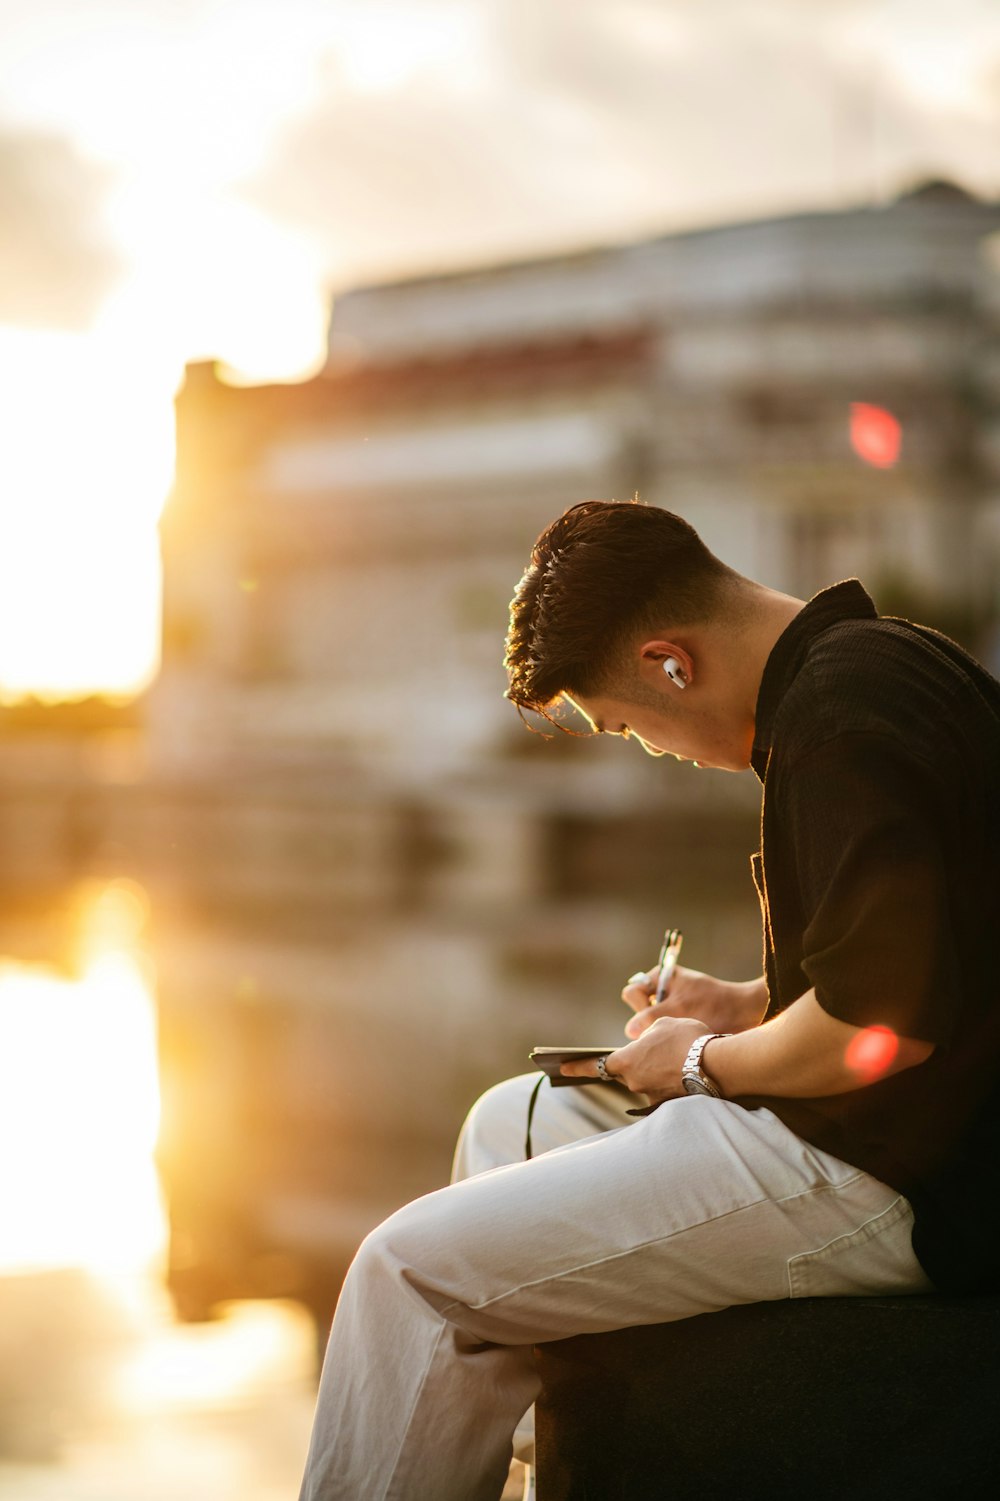 a man sitting on a bench writing on a piece of paper